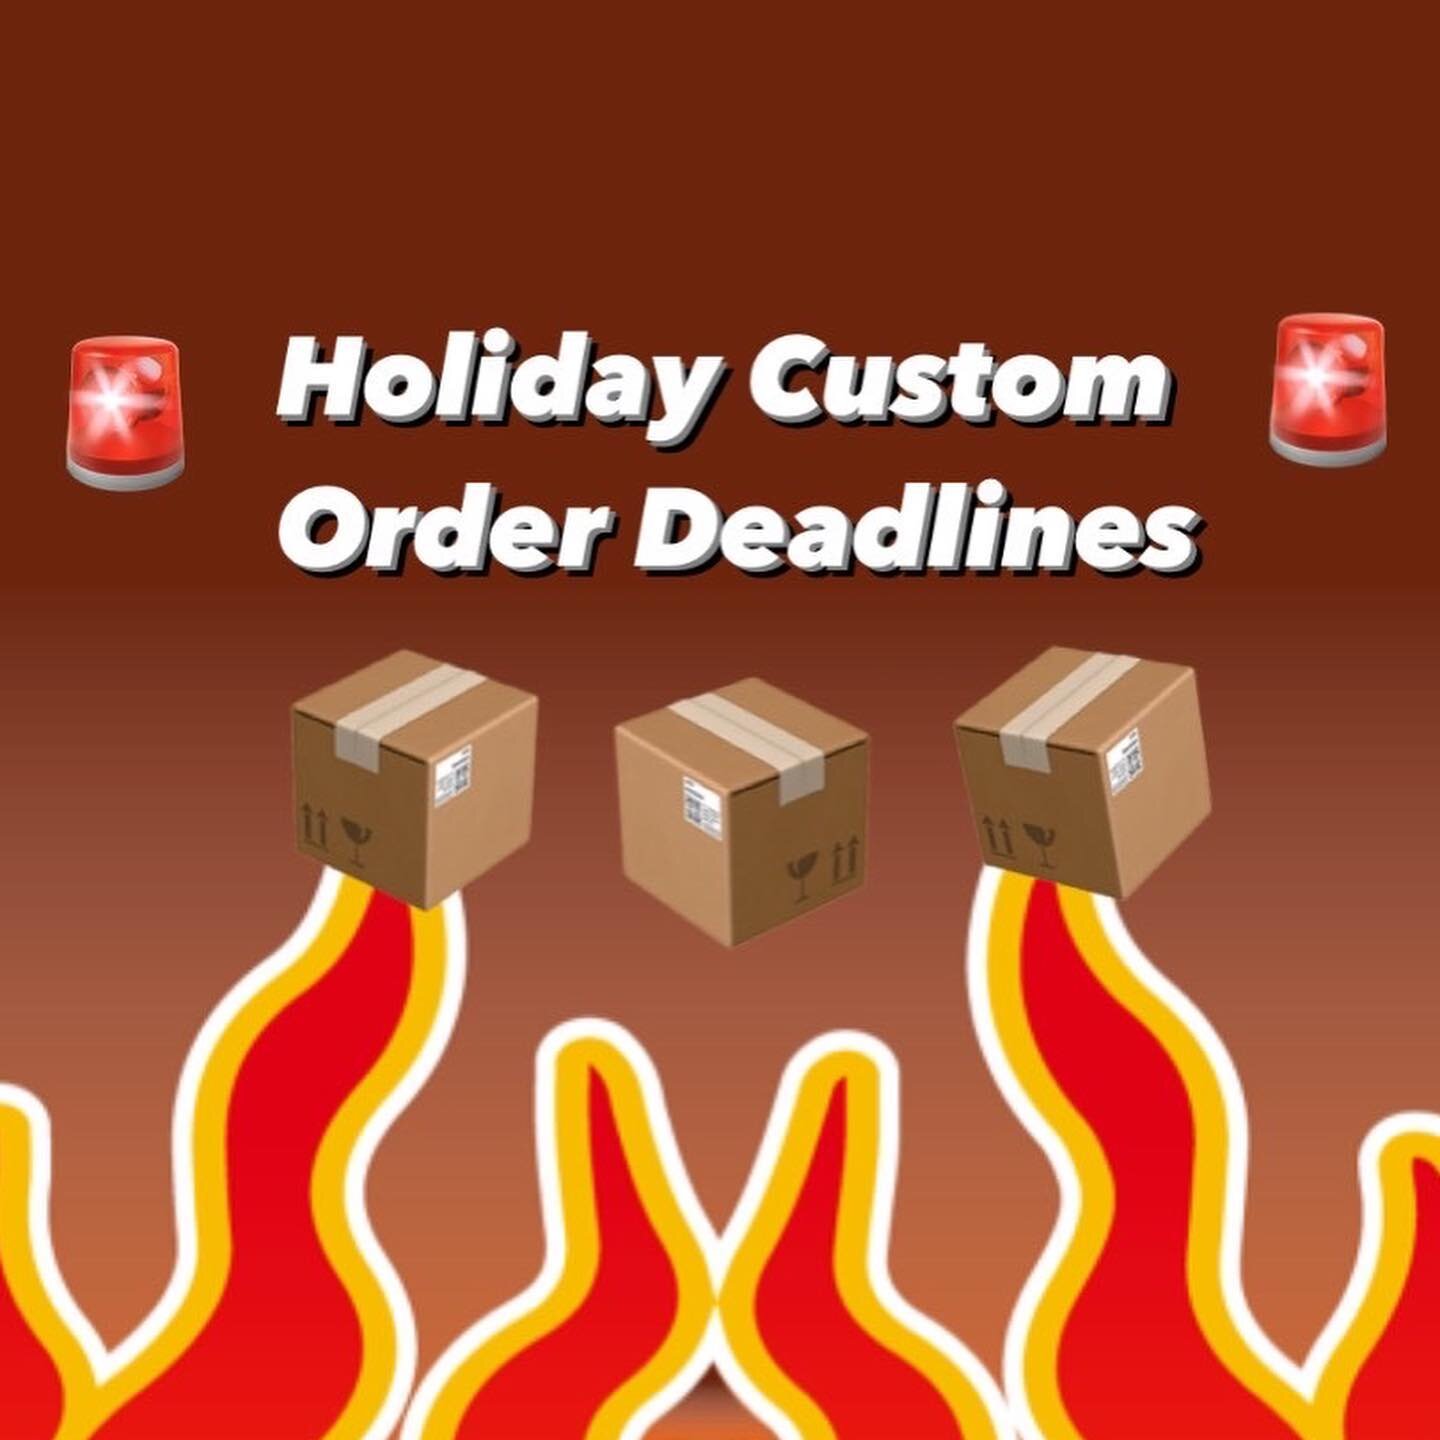 Just a little reminder for the holiday season!  Custom products that require a mould take a little extra time - As always, DM or follow link in bio for free quotes ❤️🎄

#custommade #customenamelpin #customenamelpins #pinplug #merchandising #merchand